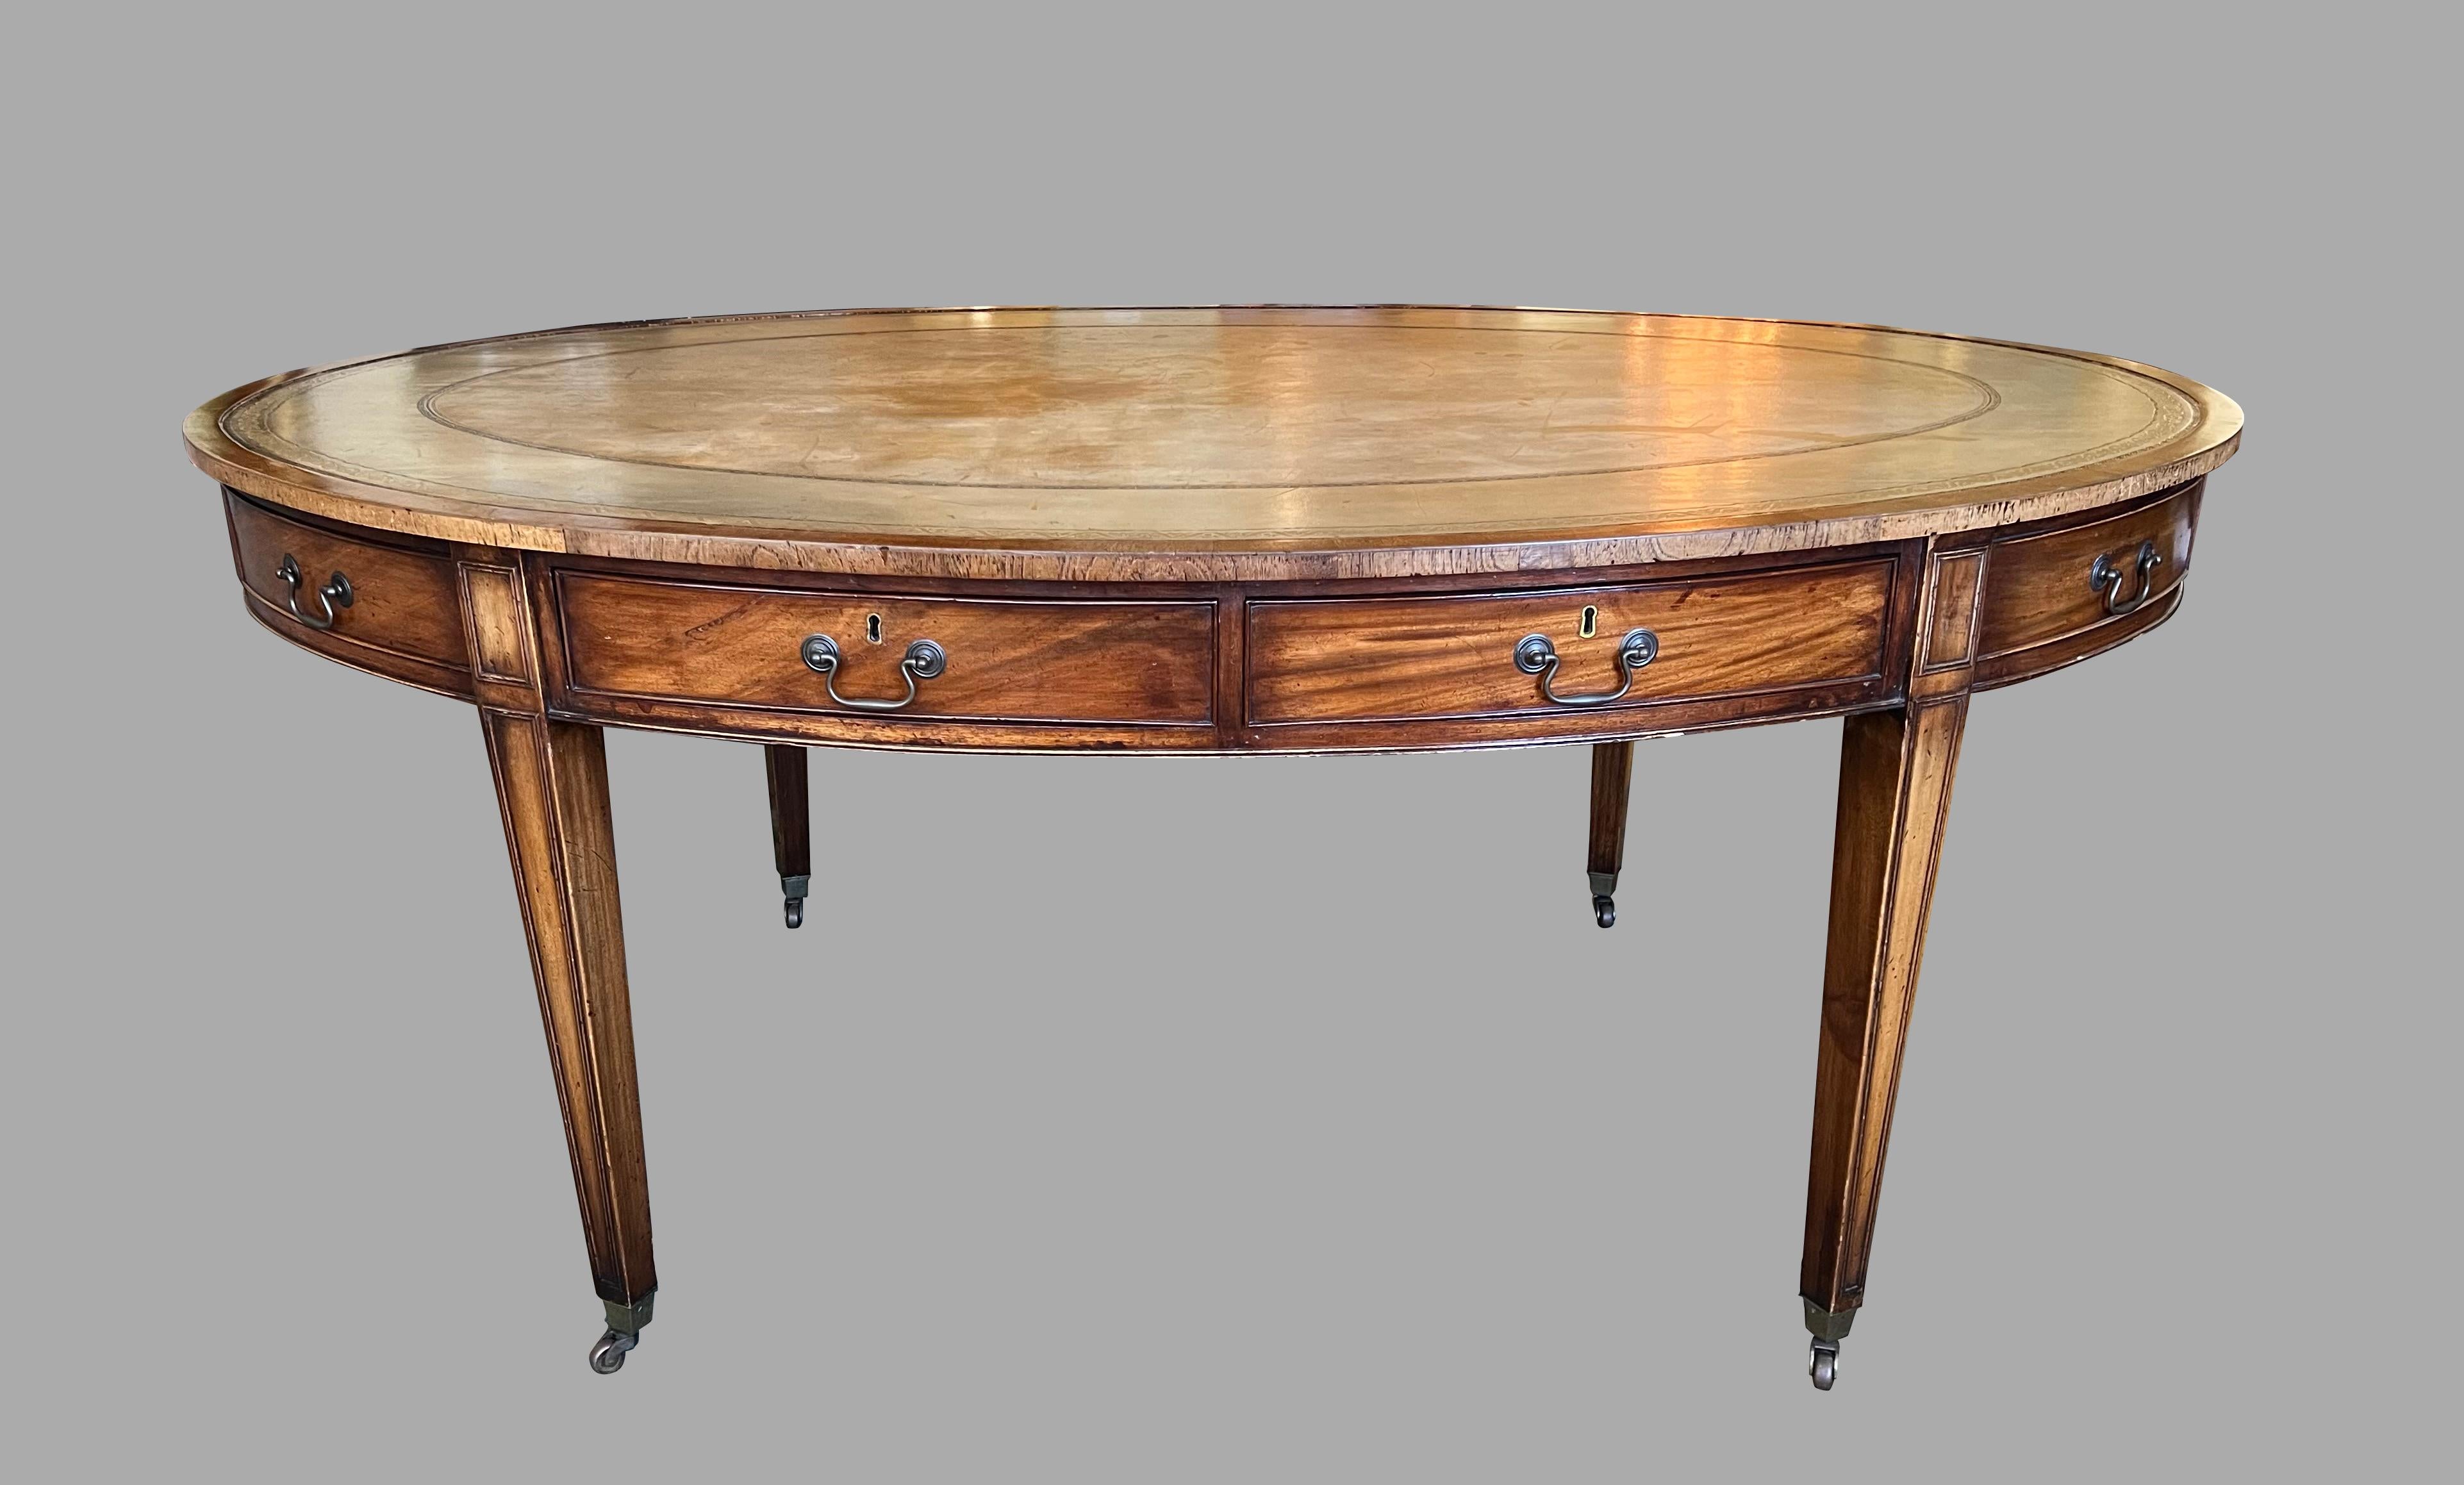 An unusual English oval writing table of large size, the gilt-tooled faded brown leather top above 4 functional and 4 false cockbeaded drawers with brass keyhole escutcheons and bail handles. The piece is supported on molded square tapered legs